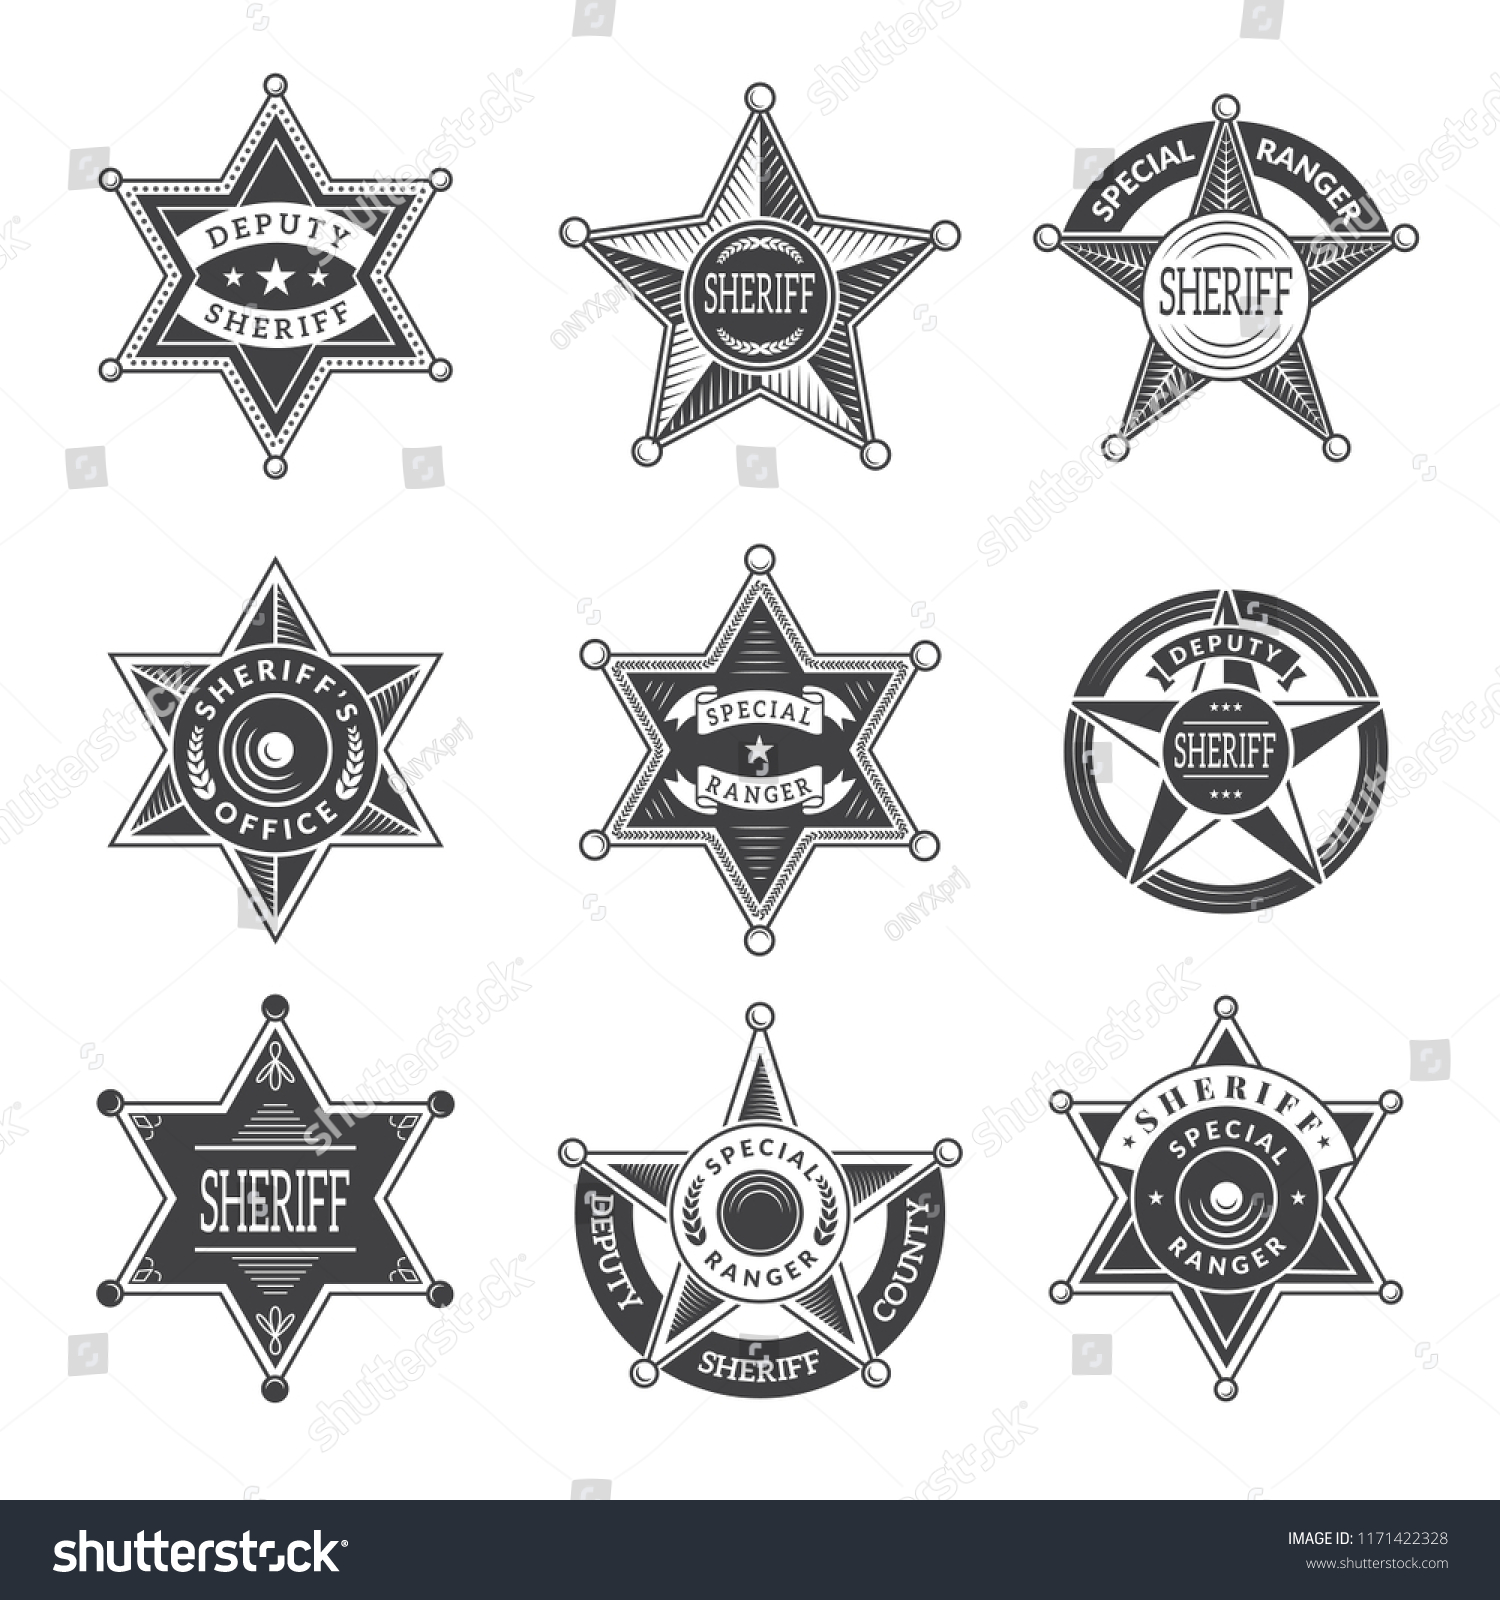 SVG of Sheriff stars badges. Western star texas and rangers shields or logos vintage vector pictures. Illustration of texas star, ranger sheriff badge svg